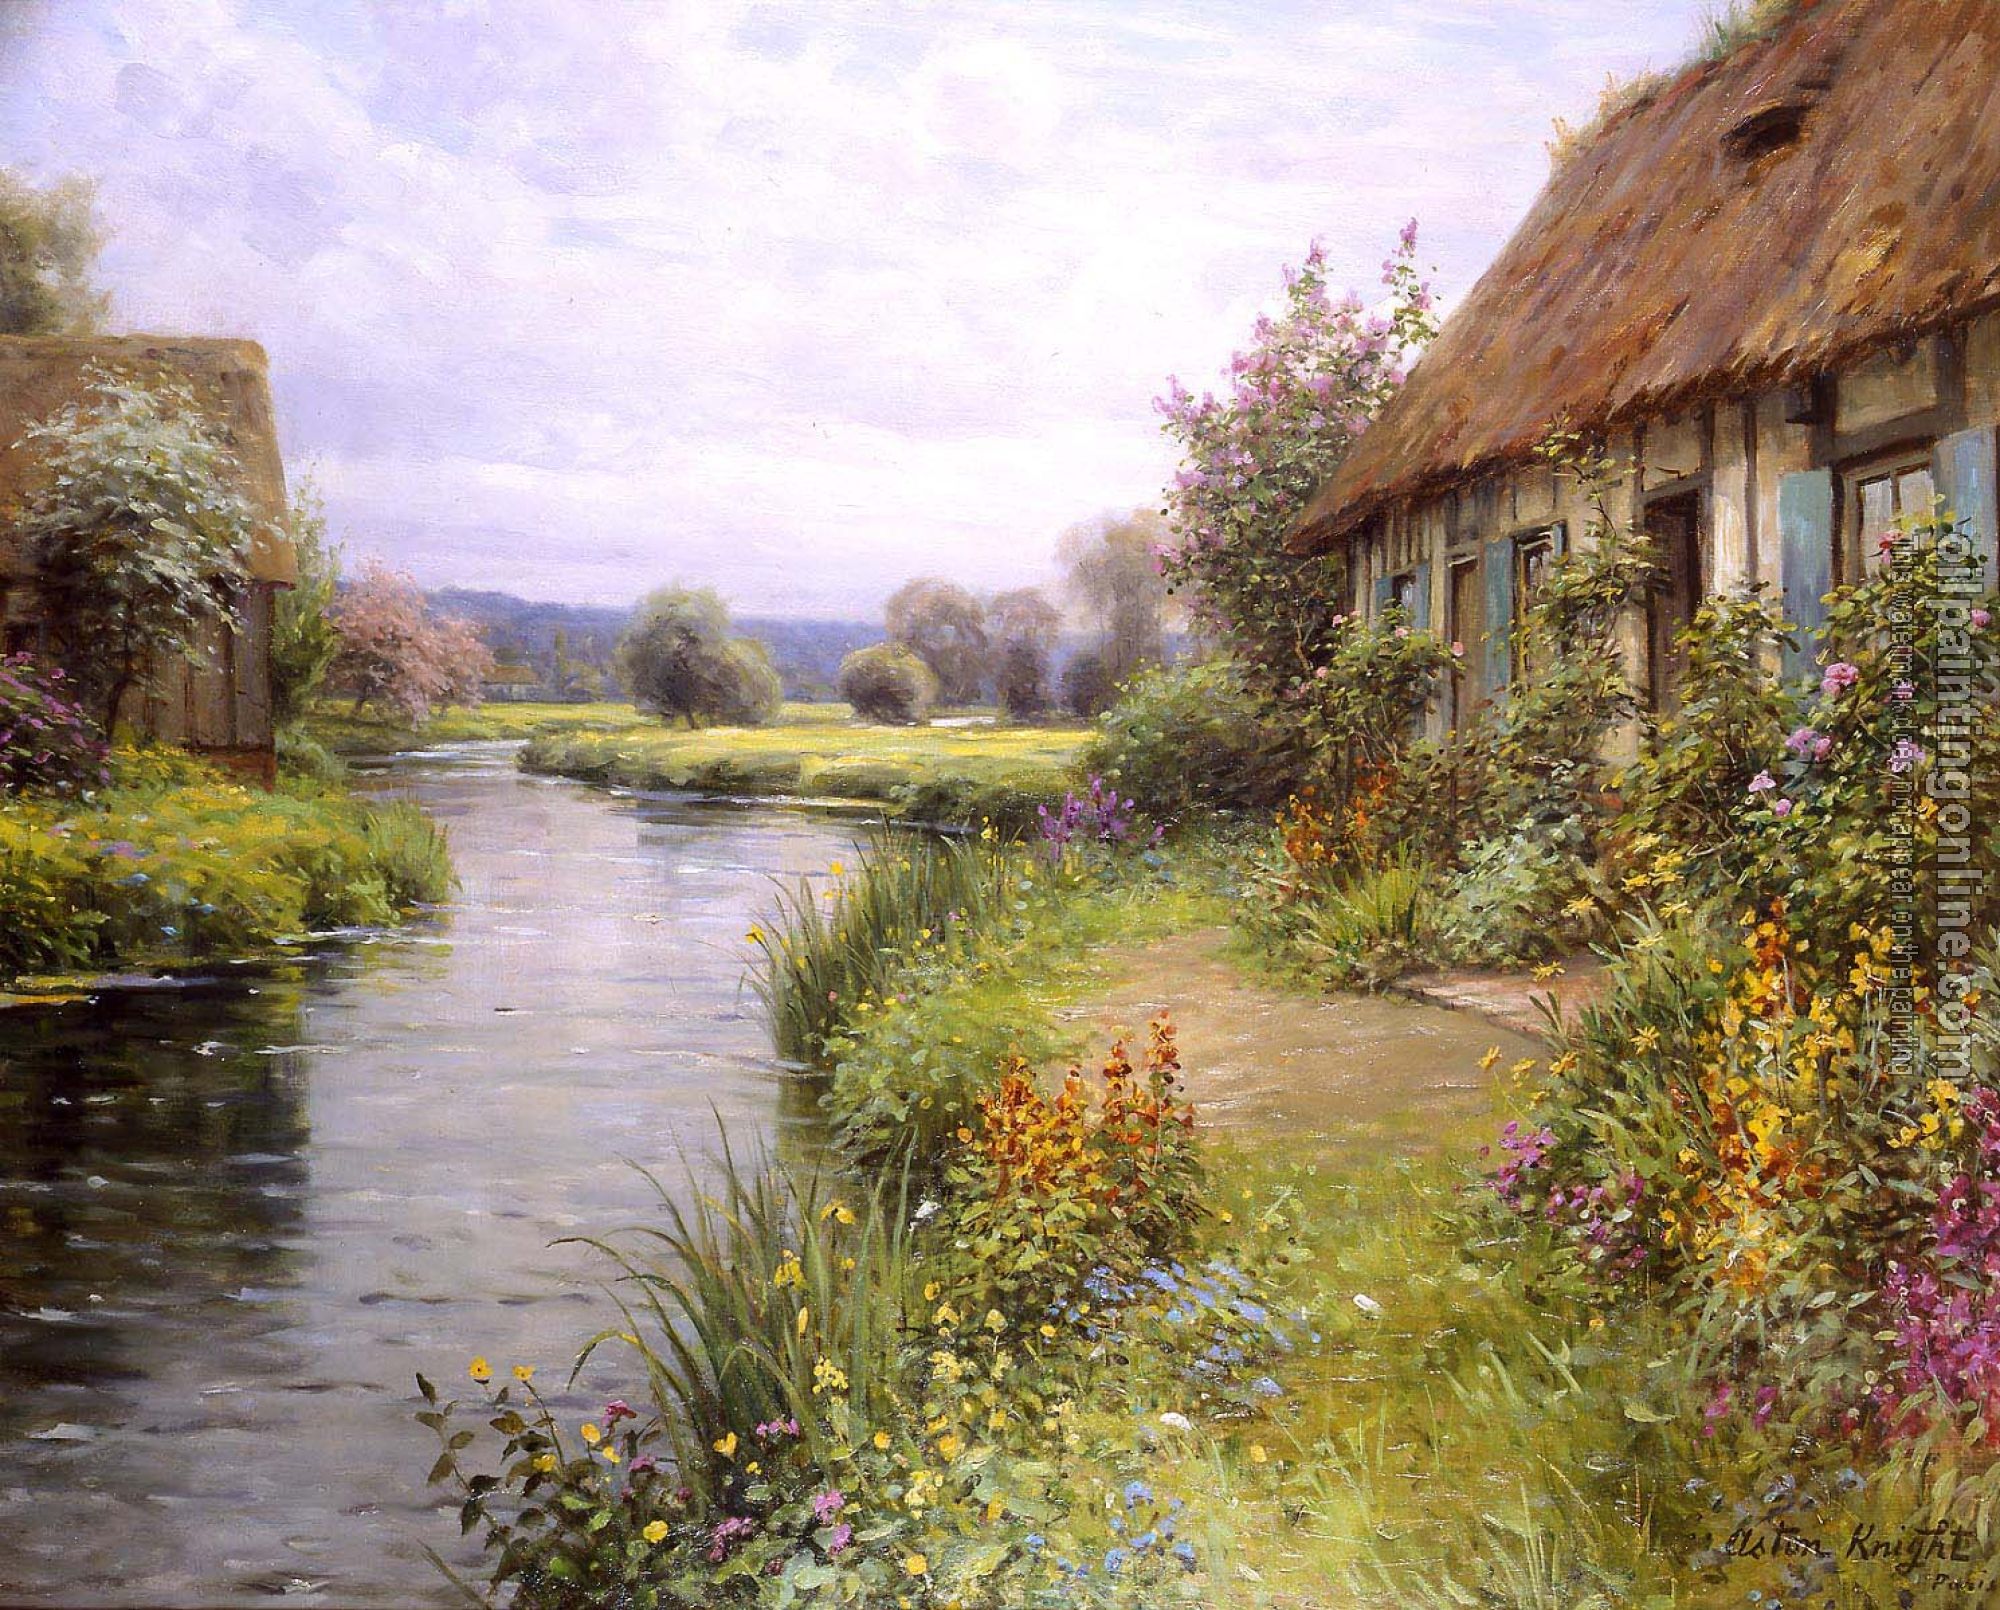 Knight, Louis Aston - A Bend in the River